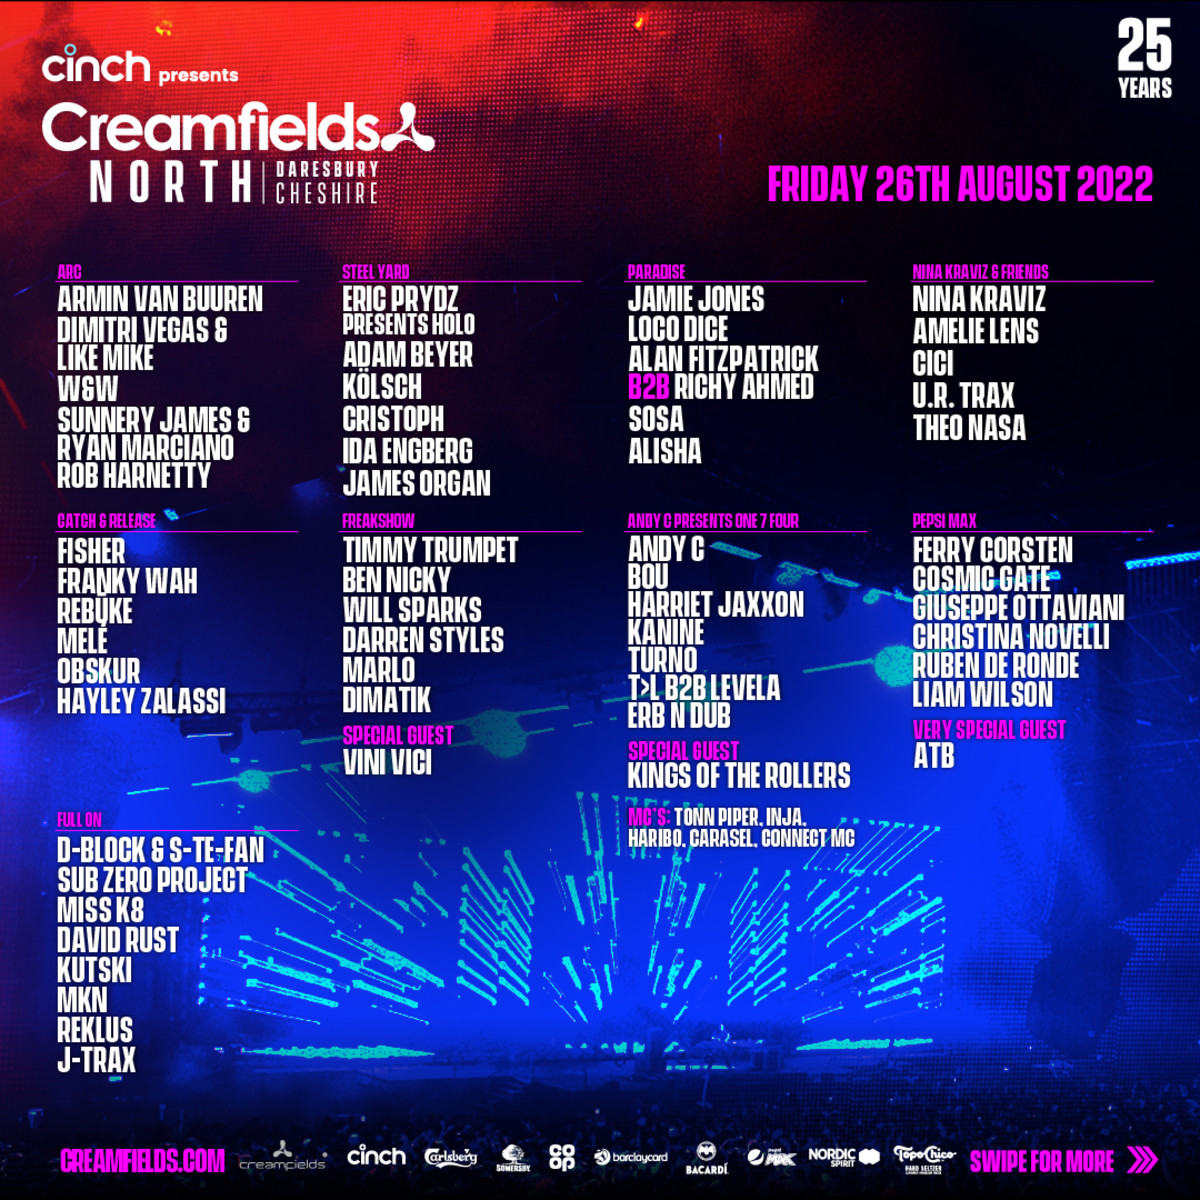 Creamfields North 2022 lineup: Friday, August 26th, 2022.